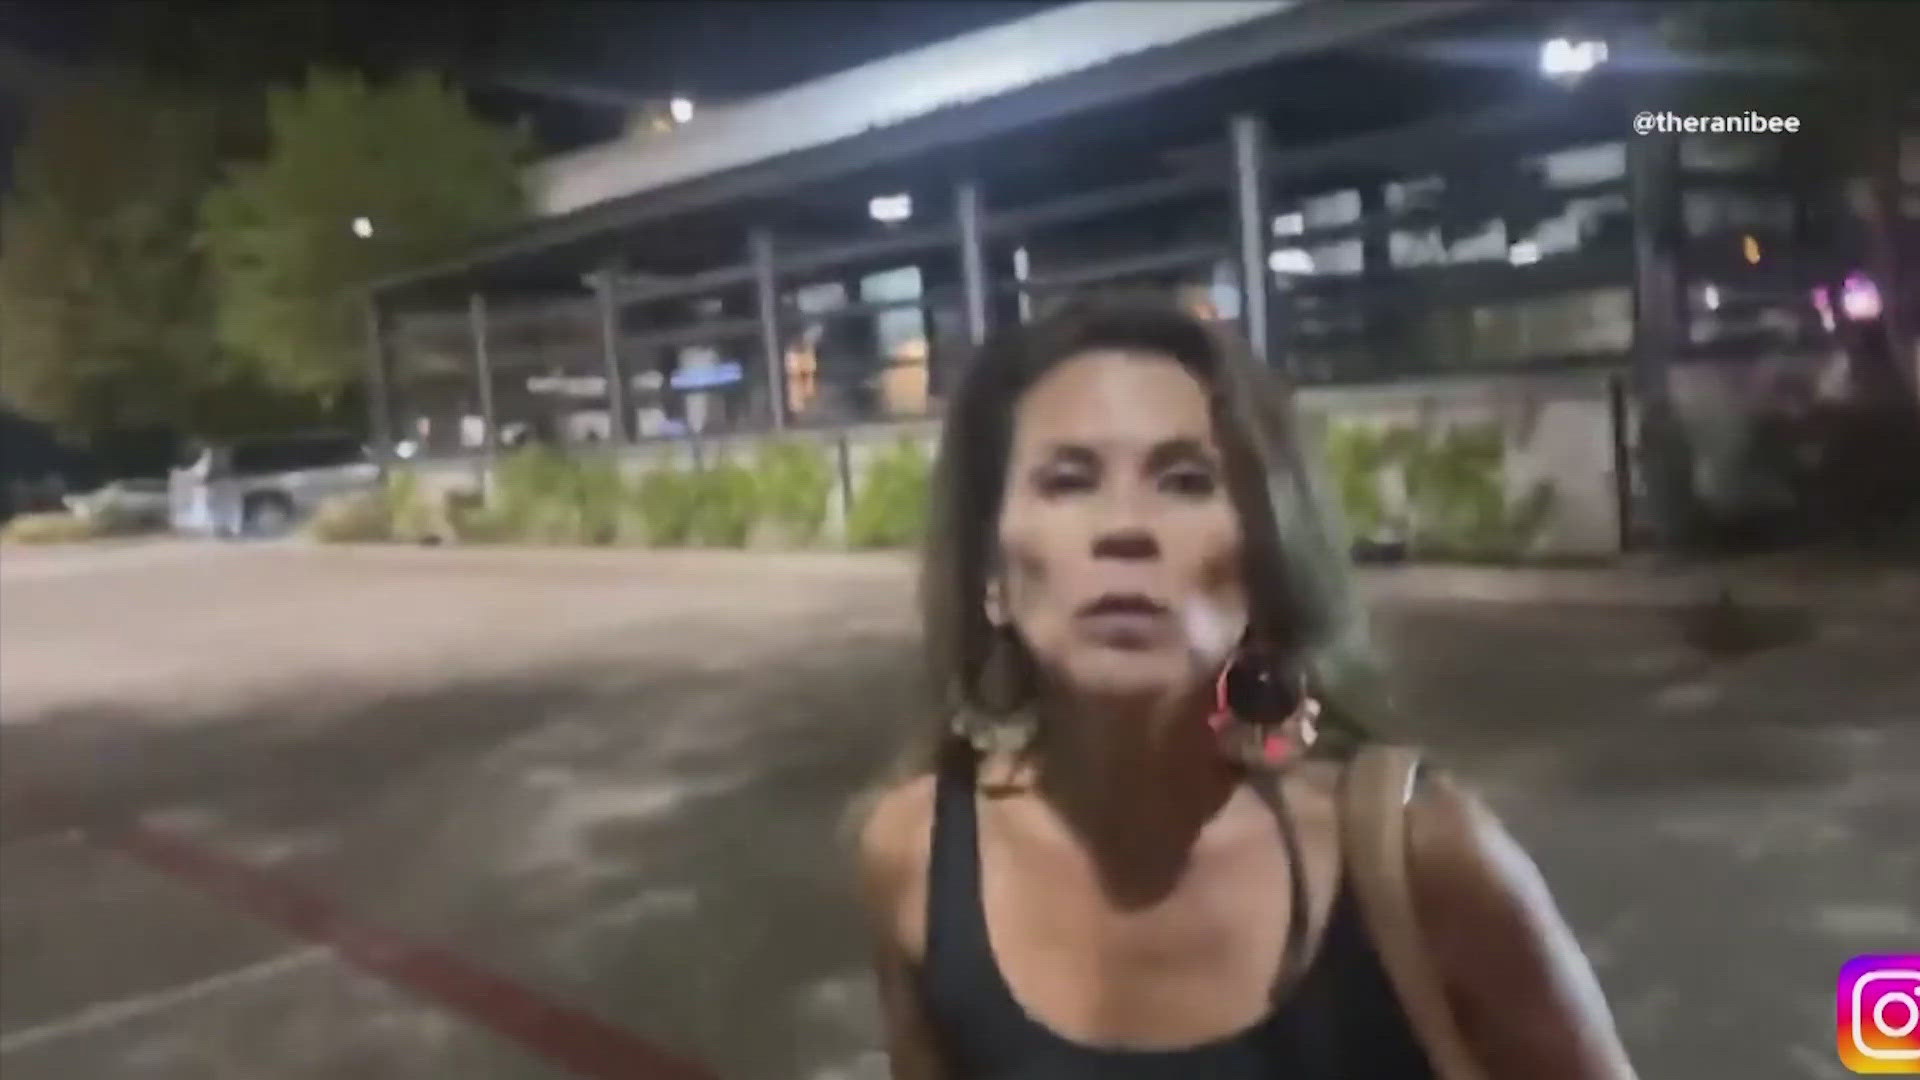 The woman from Plano accused of yelling racial slurs and assaulting a group of women has been convicted of a hate crime.